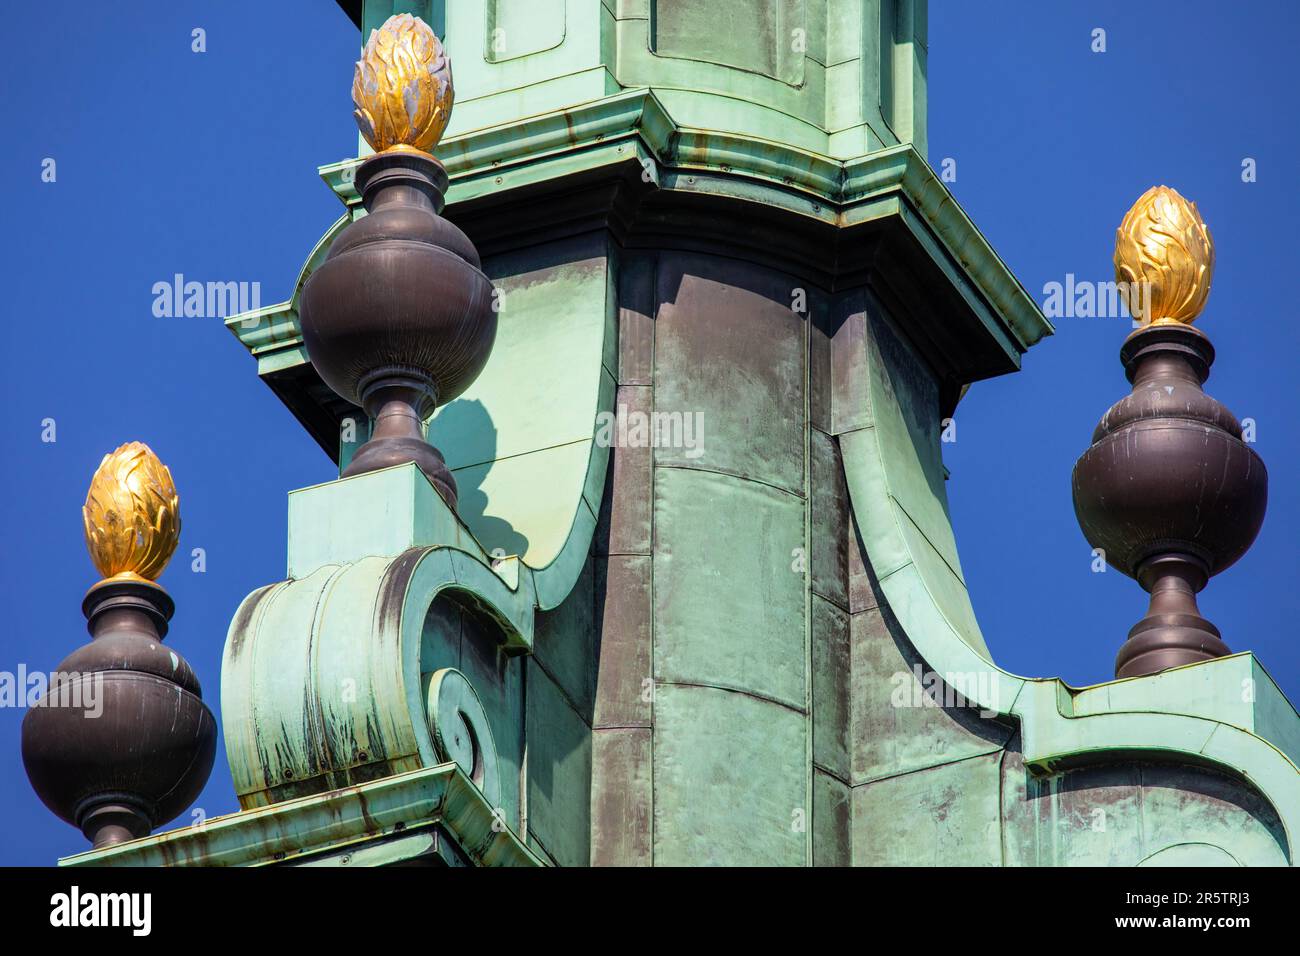 Detail of the ornate spire of All Hallows by the Tower in London, UK.  The church is known to be the oldest church in the City of London, UK. Stock Photo